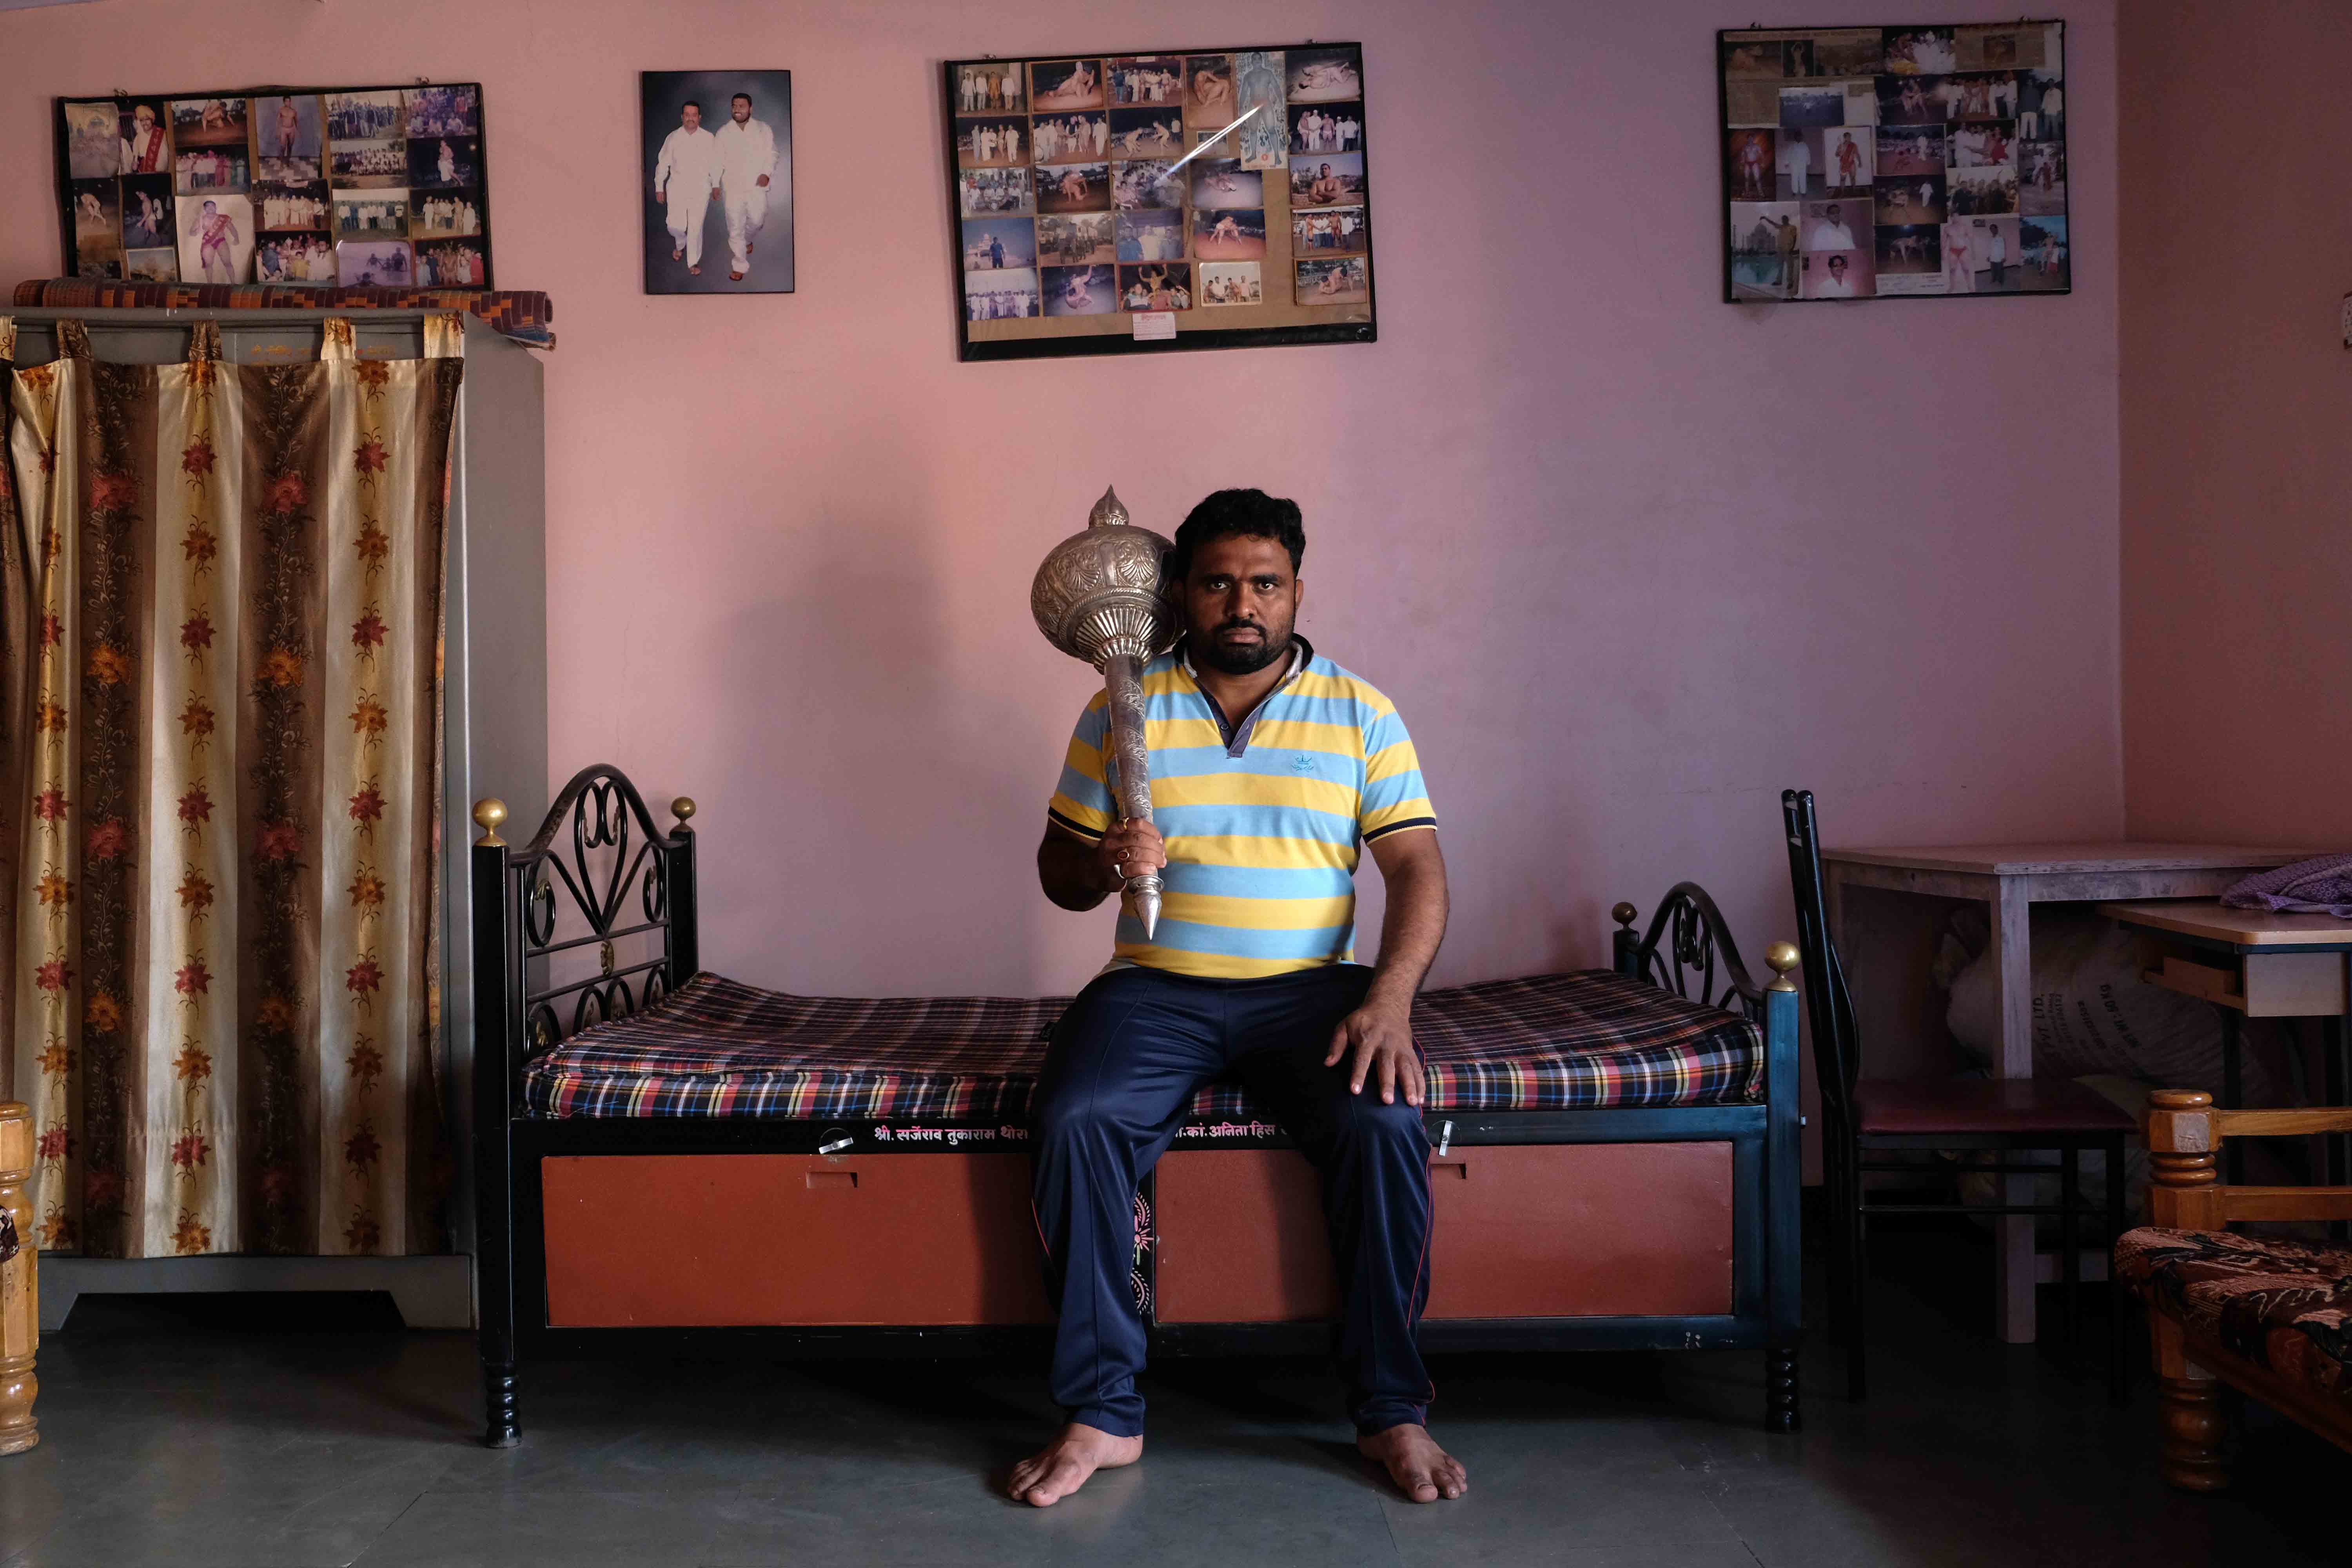 Portrait of Santosh Vetal (aged 38) at his home. Vetal won the Hind Kesari title in 2014 which is the most prestigious award in Indian wrestling. He lives in Surli village of Satara district in Maharashtra. The silver mace (gada) which he is holding is the prize he won for winning the Hind Kesari title. Gada is the primary weapon of Lord Hanuman and is presented as a trophy to winners of wrestling competitions in India. Photograph by Indrajit Khambe ©Sahapedia 